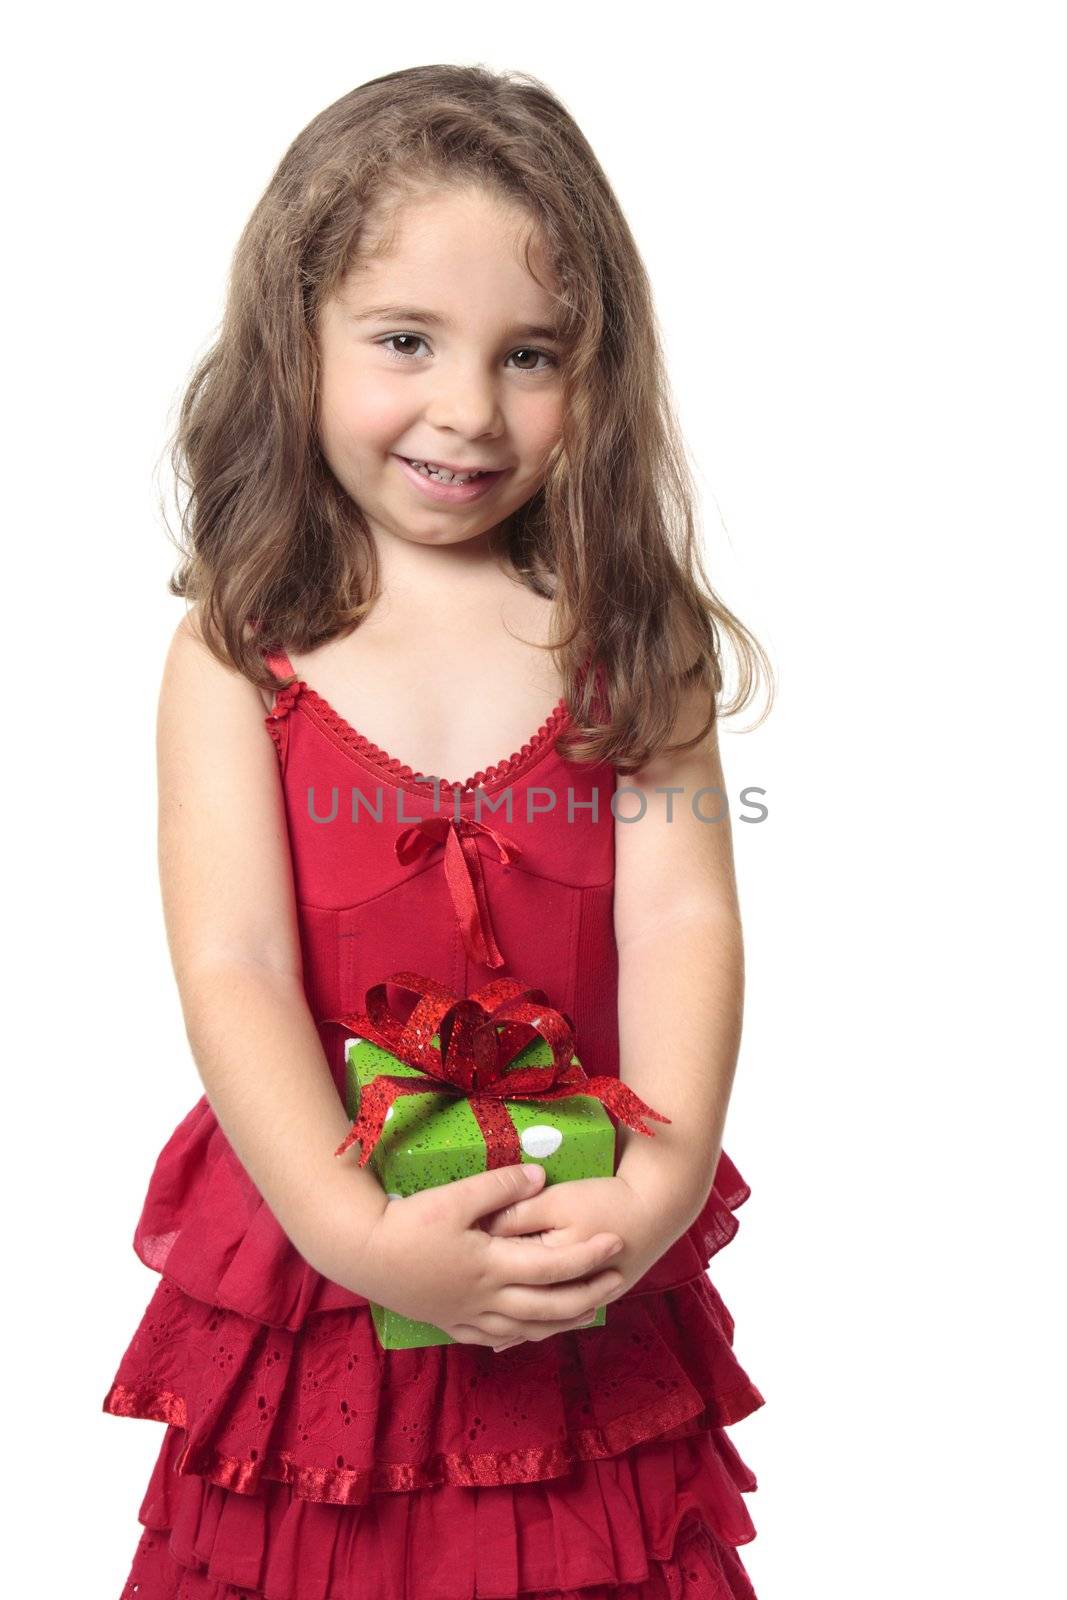 Little girl in a red dress holds a green and red present and smiles sweetly.